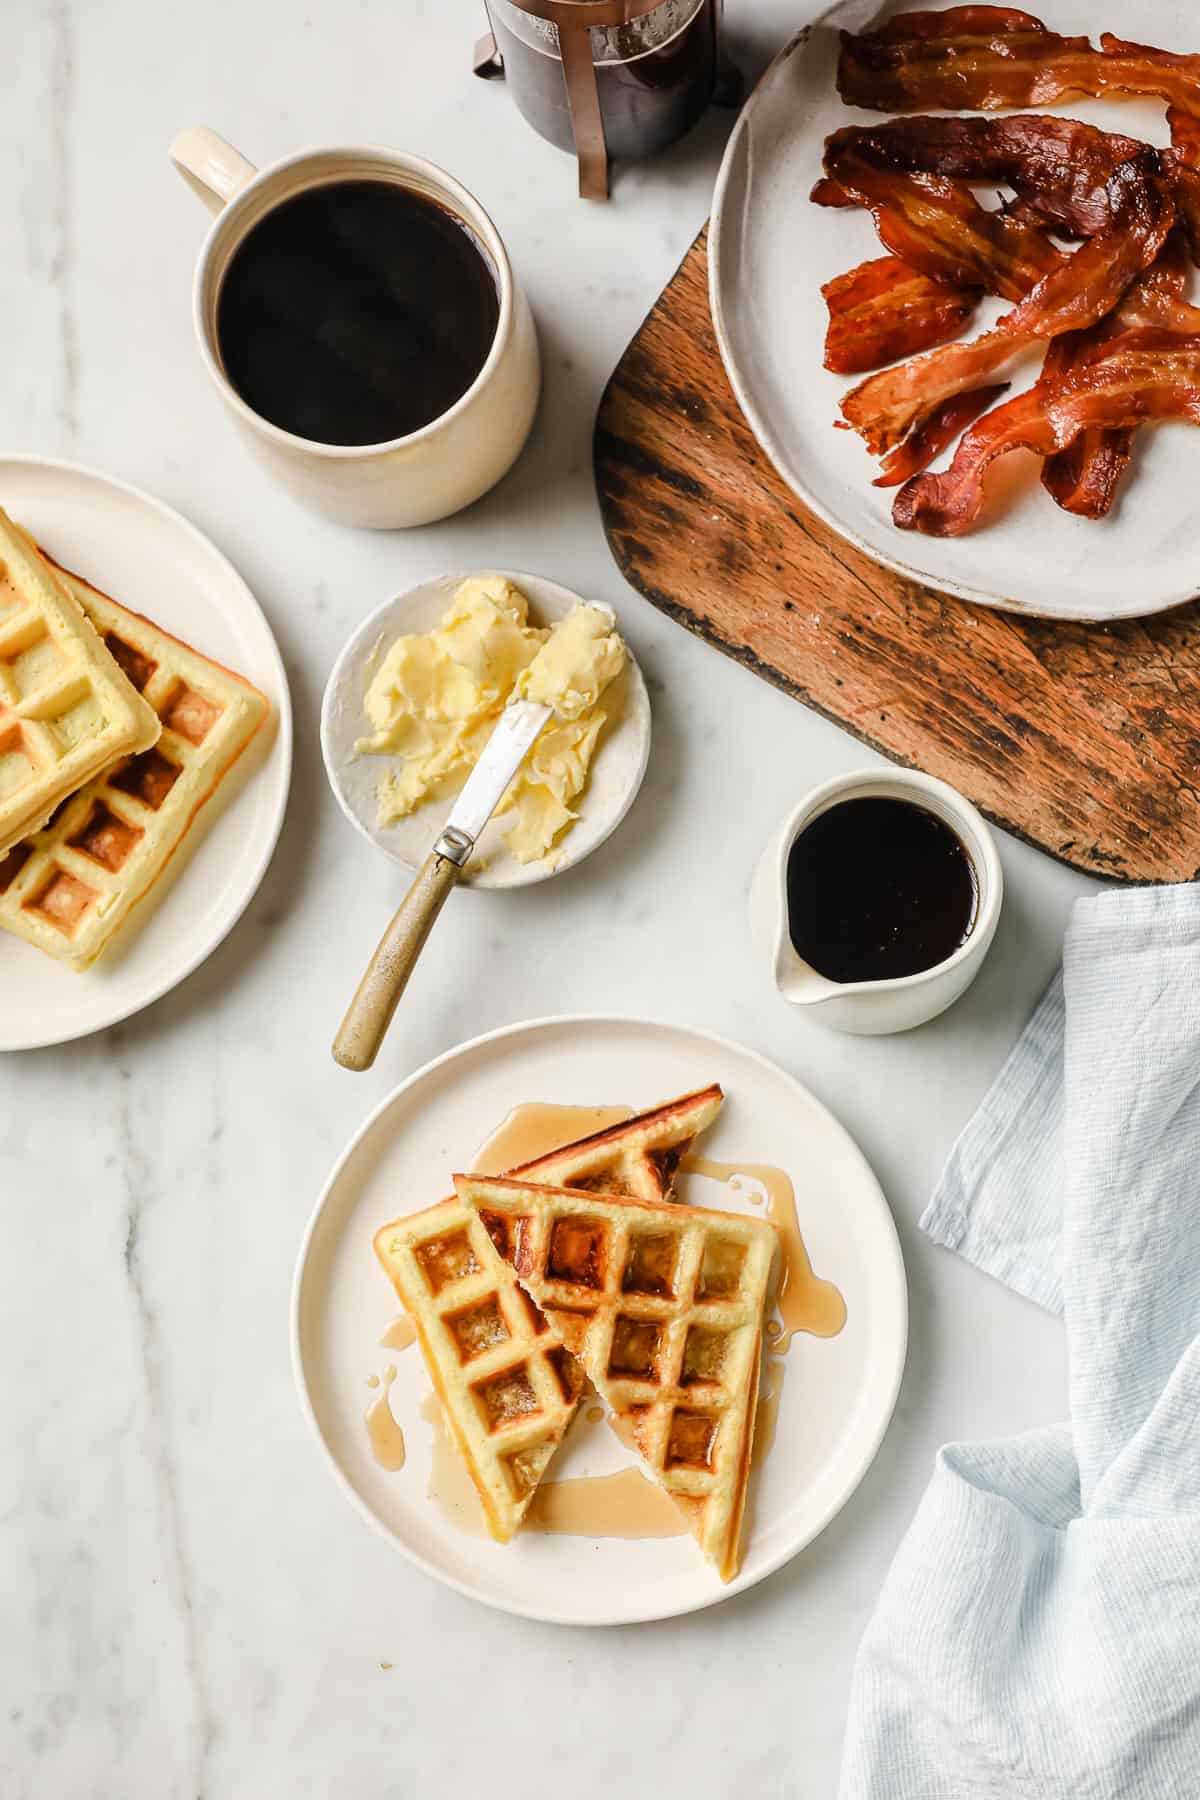 coconut flour waffles on a white plate, with syrup and bacon on the side